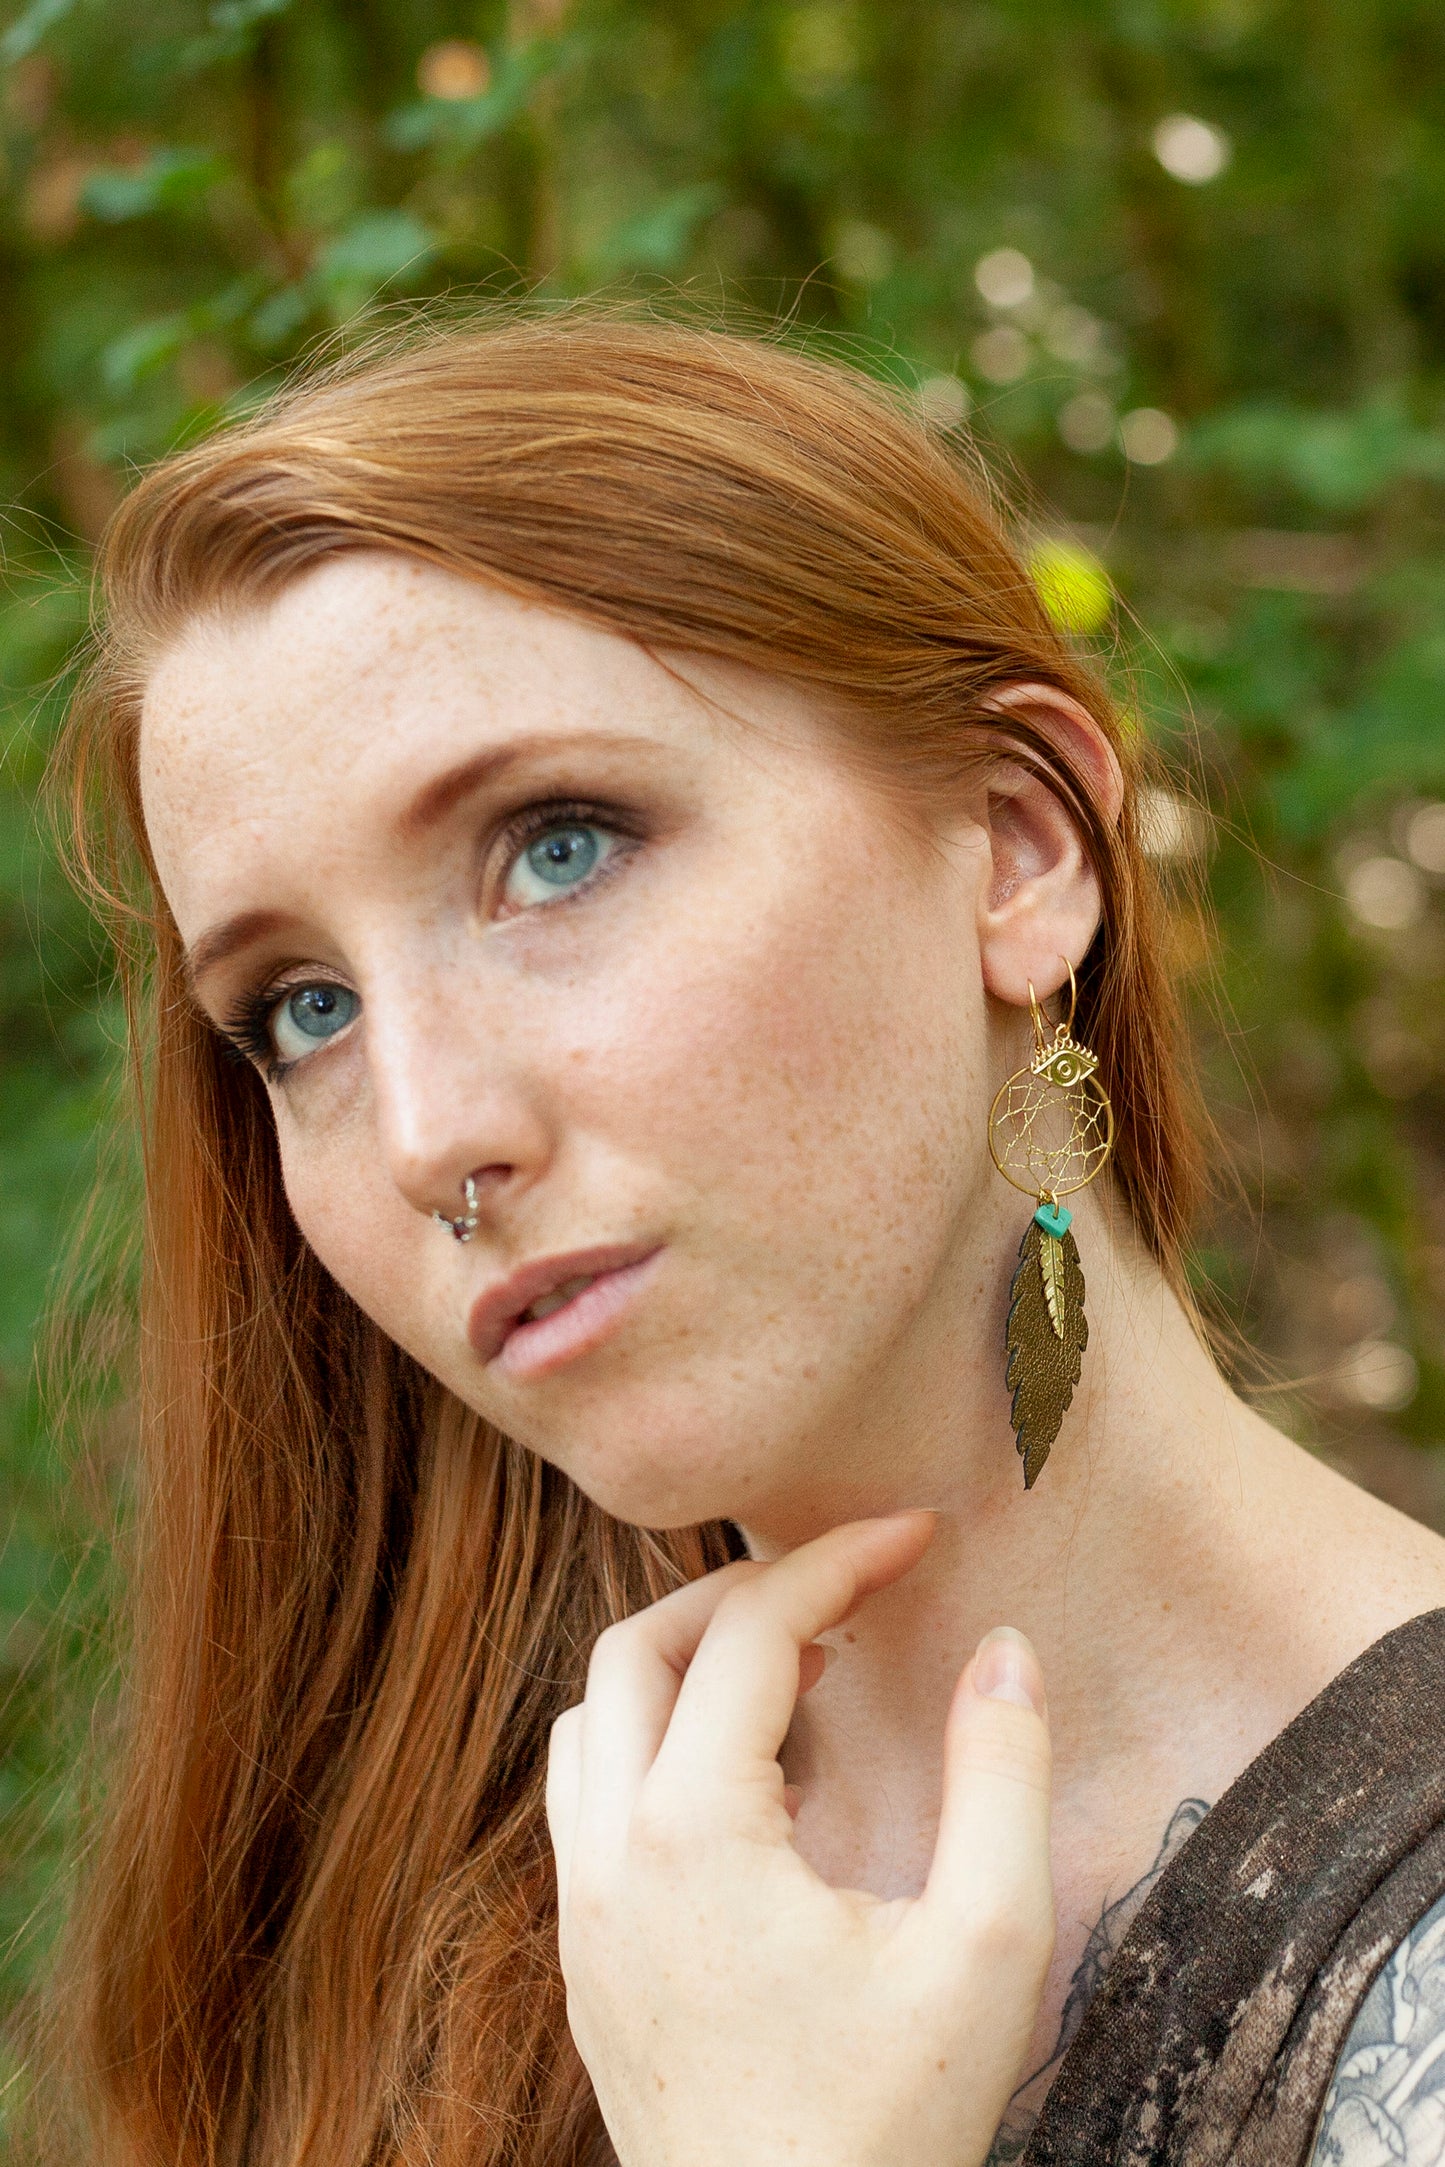 Dreamcatcher earrings with bronze leather feathers and turquoise stone